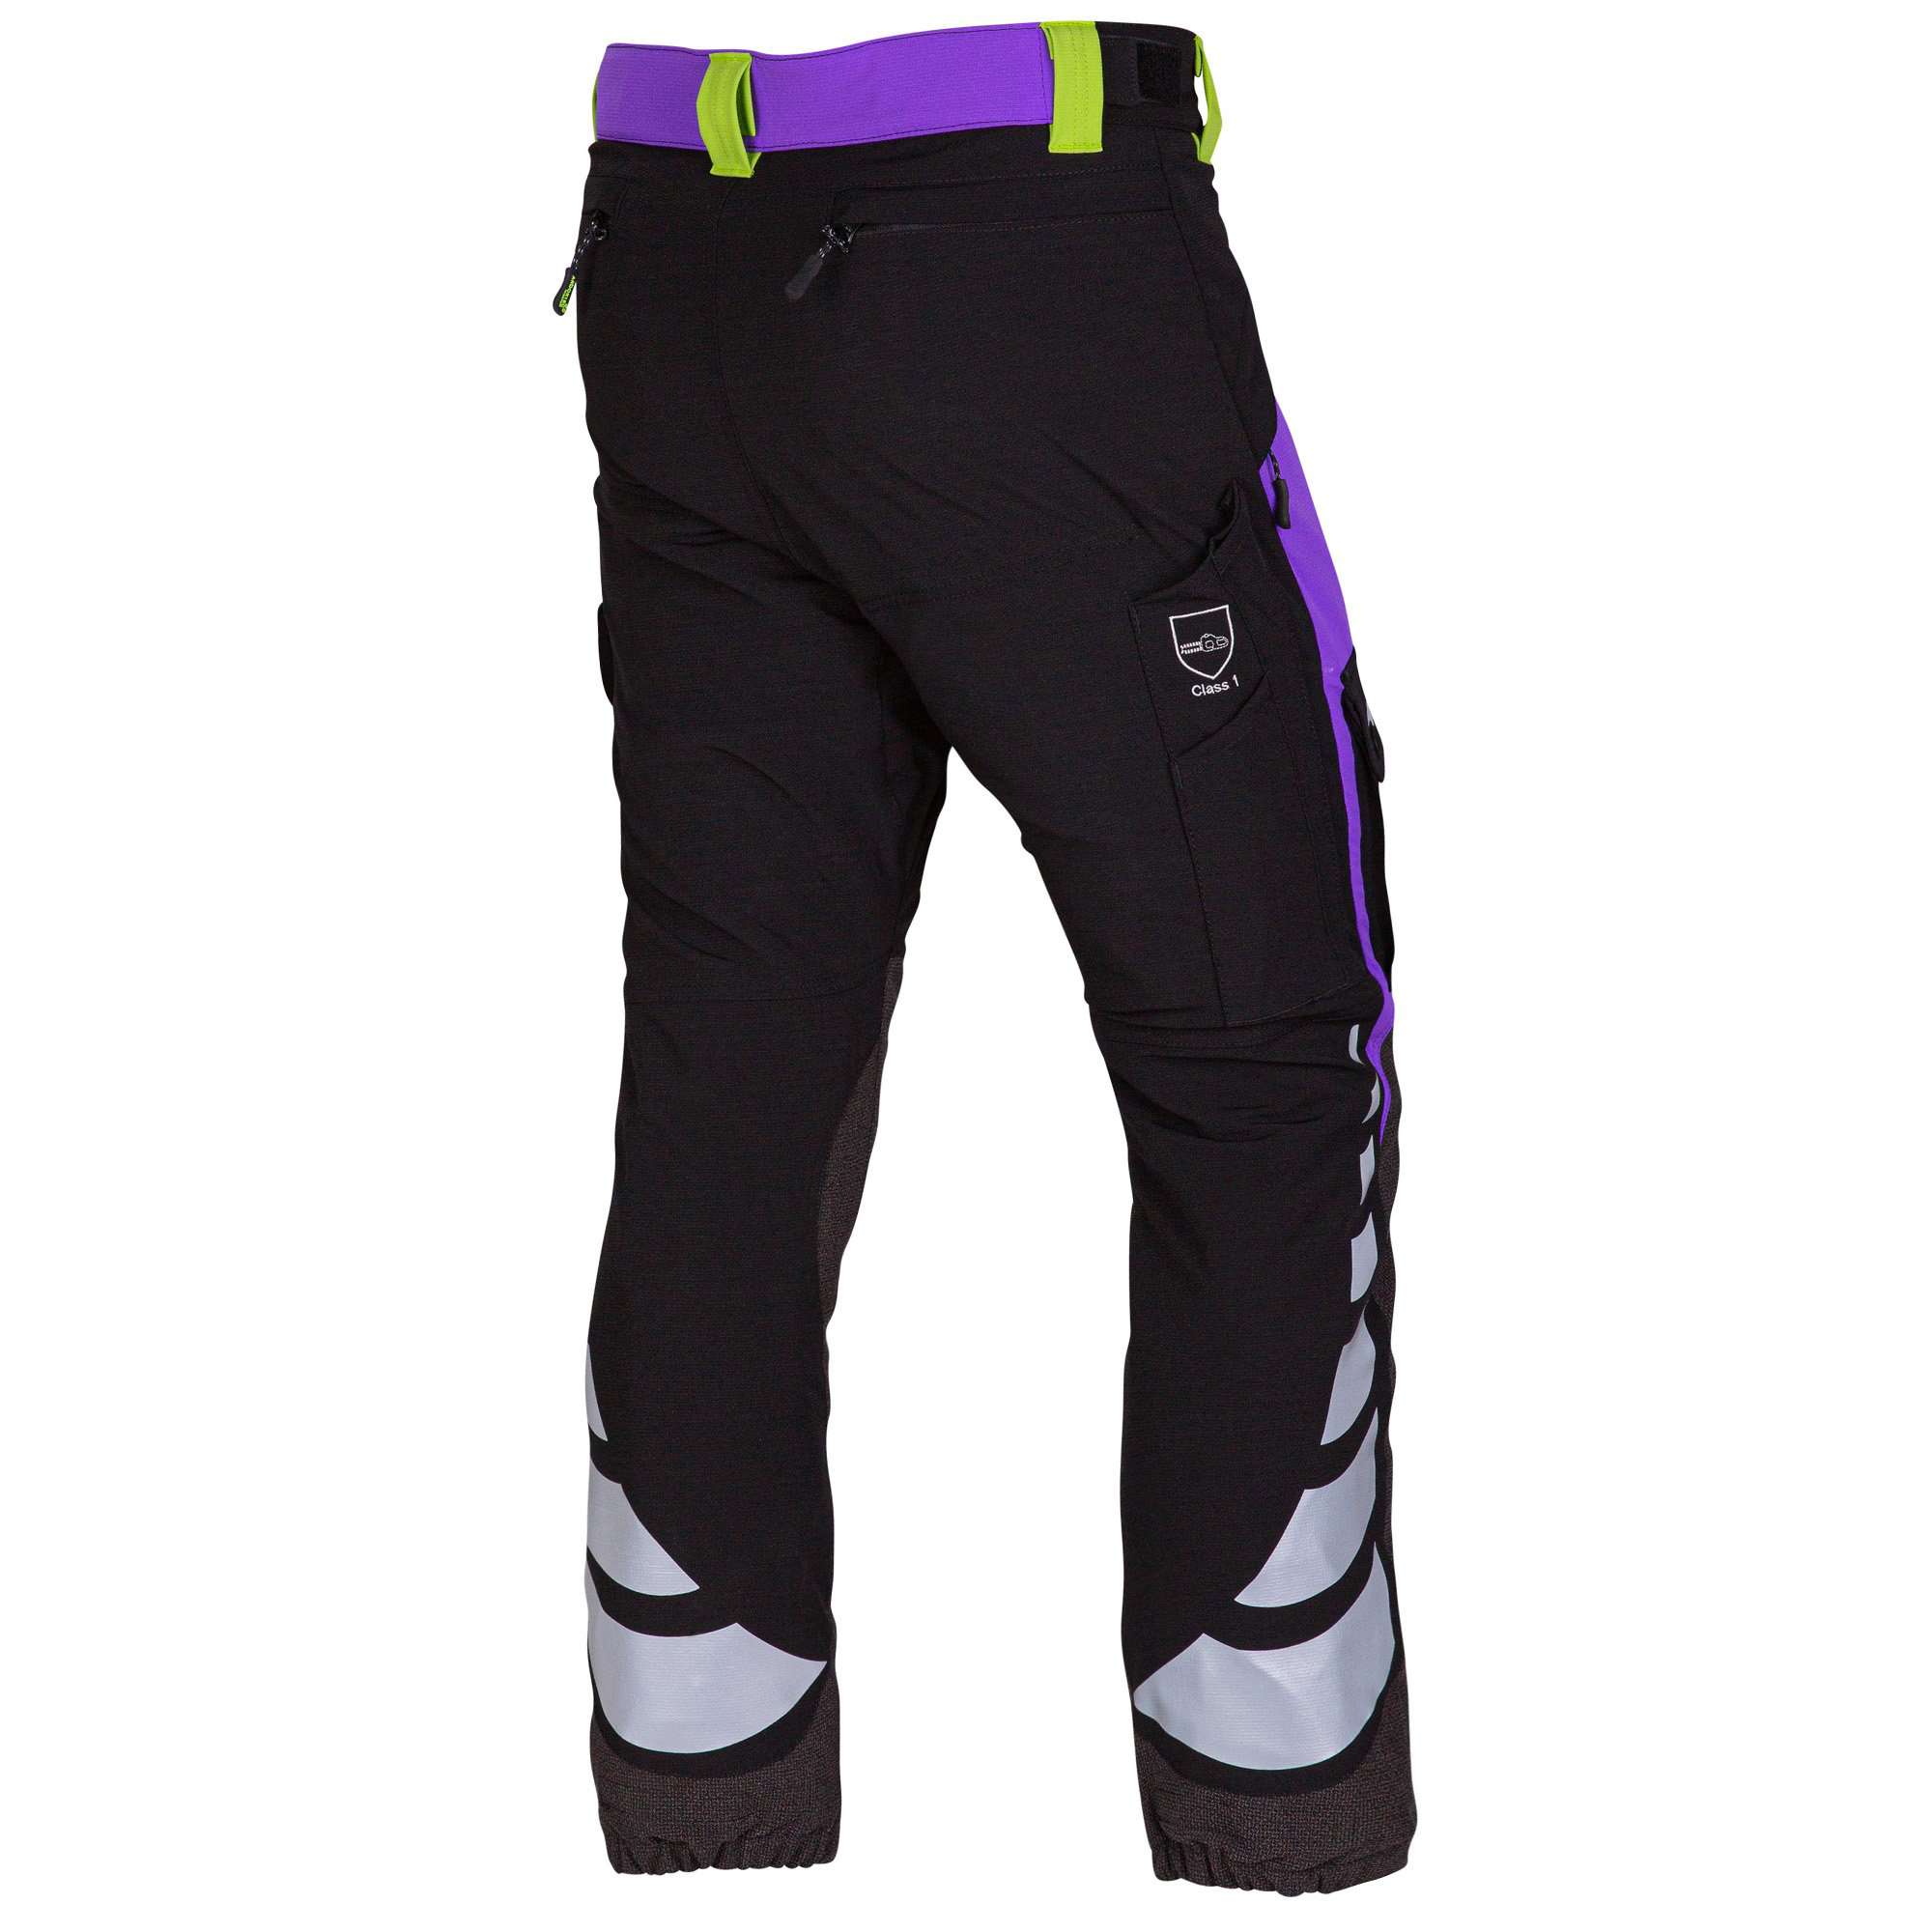 AT4010 Breatheflex Ladies Type A Class 1 Chainsaw Trousers - Purple - Arbortec Forestwear